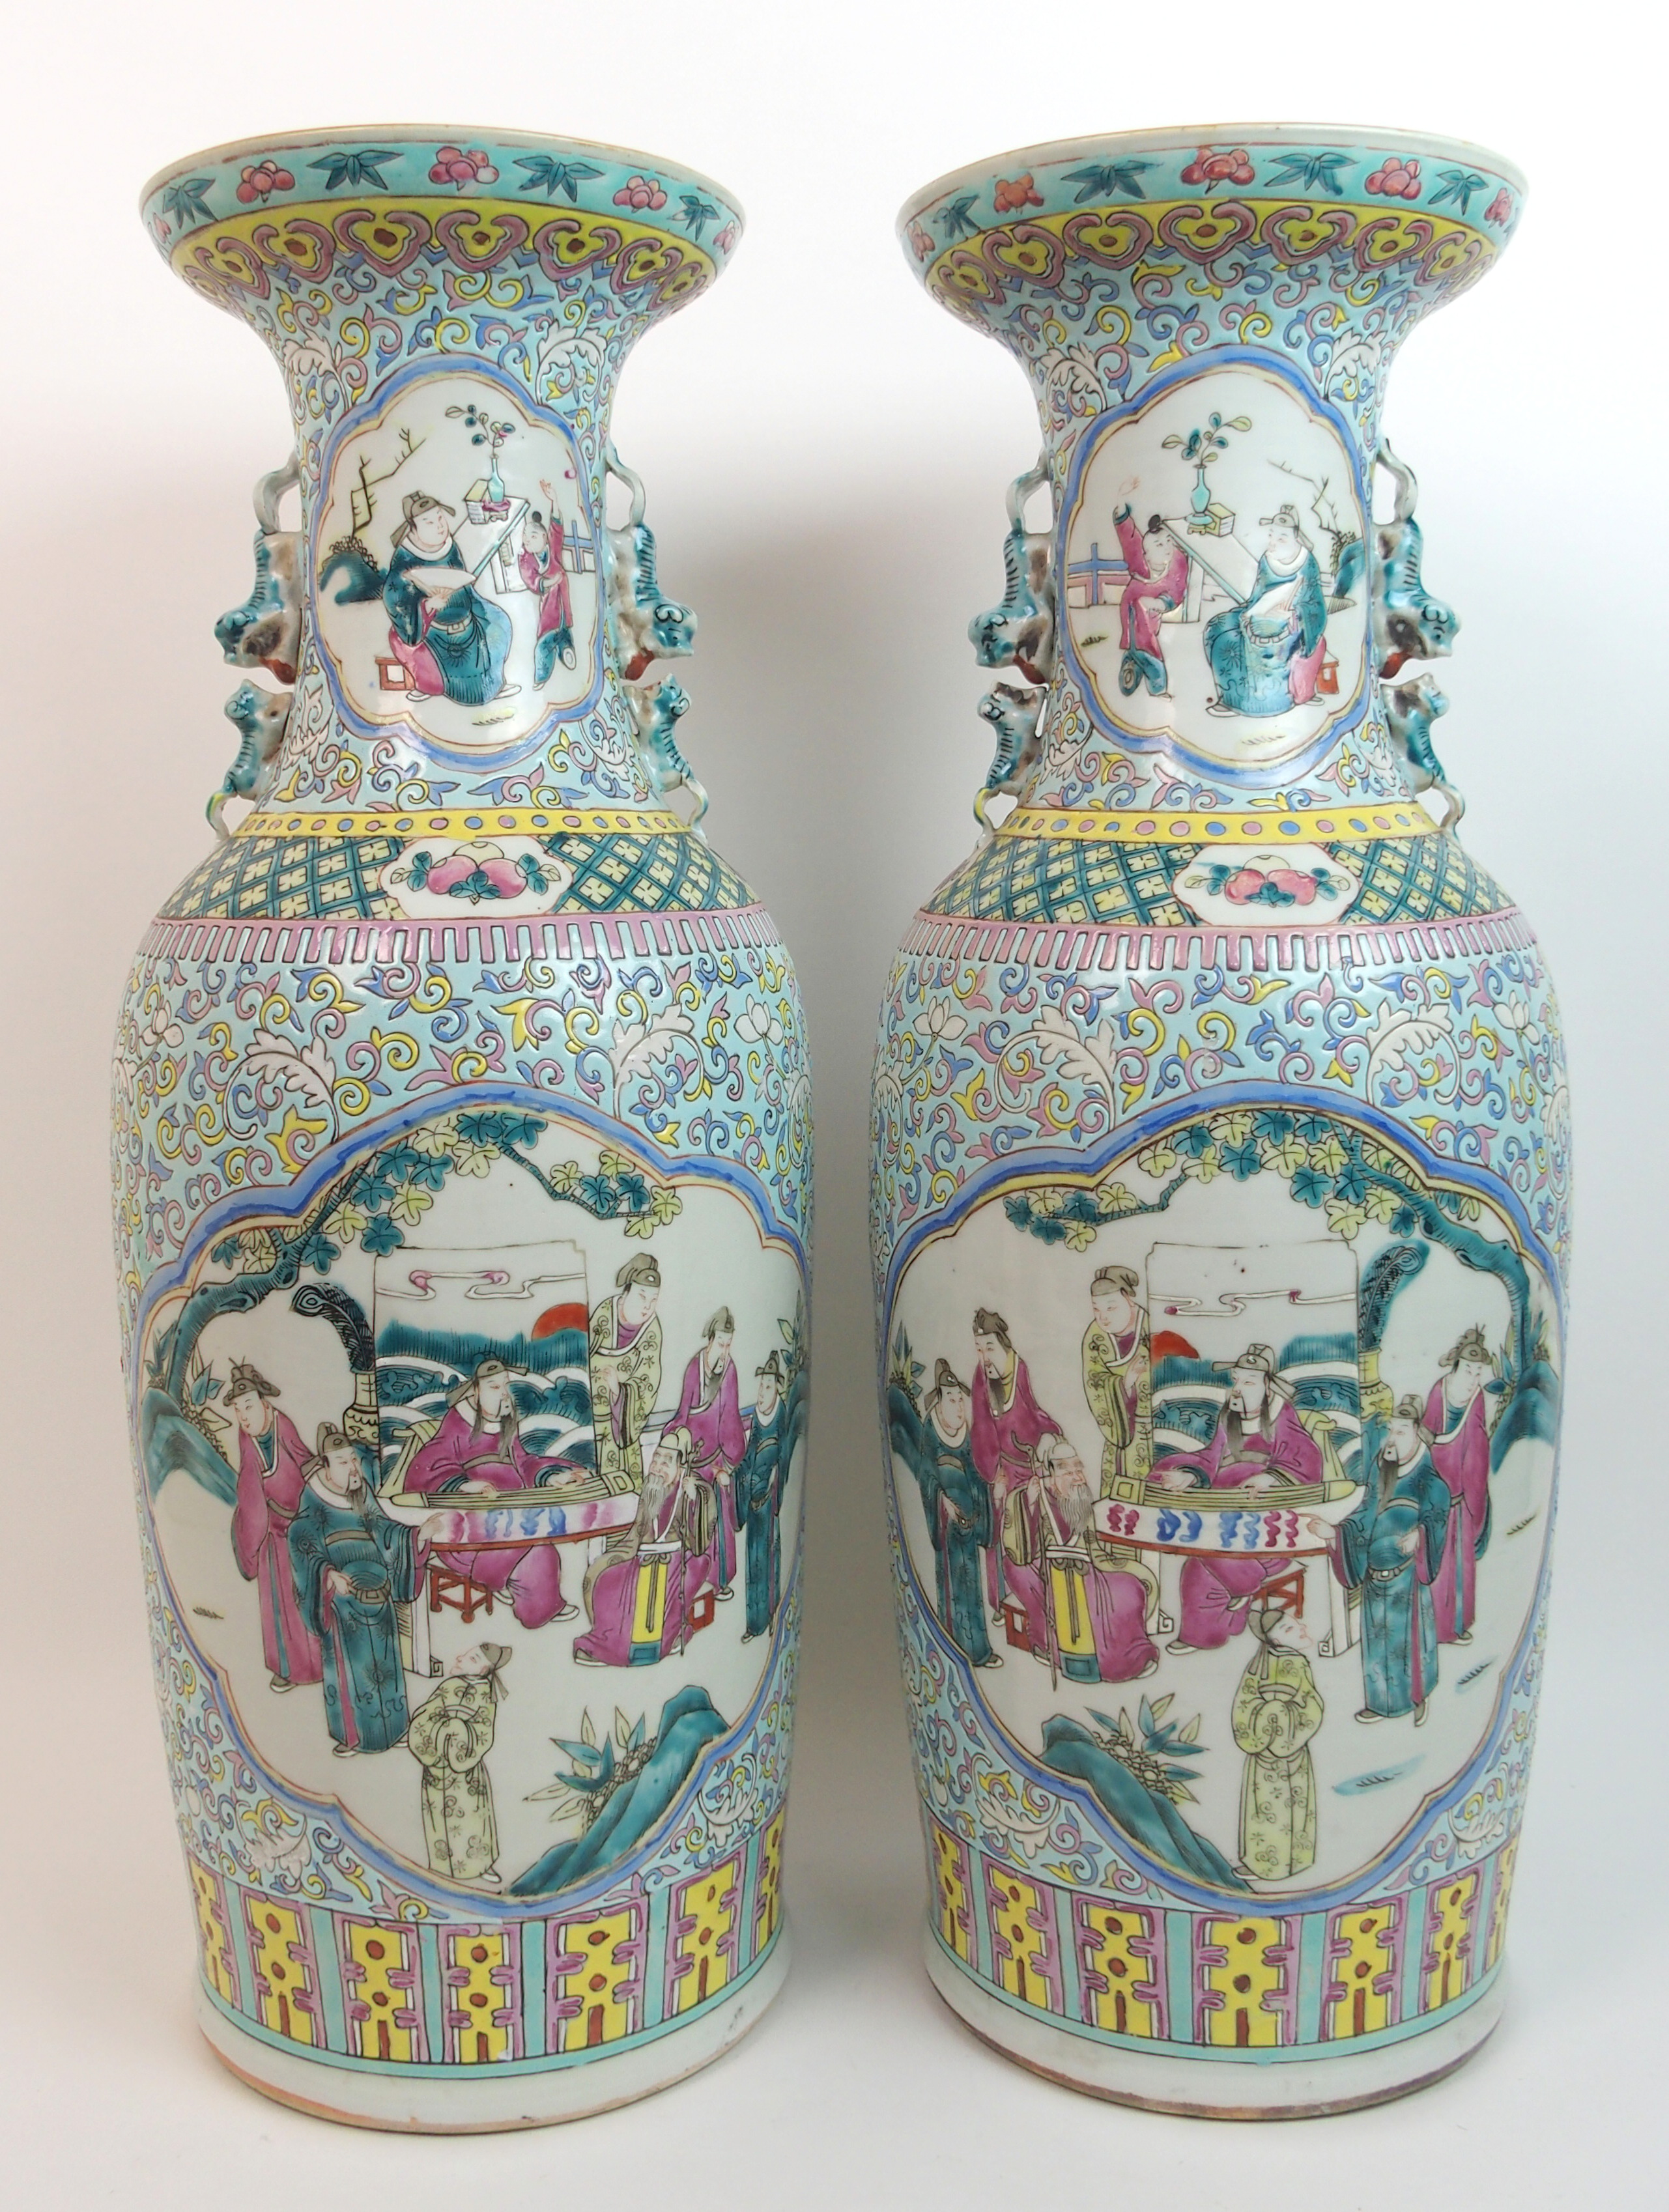 A large pair of Cantonese famille verte baluster vases painted with panels of sages and